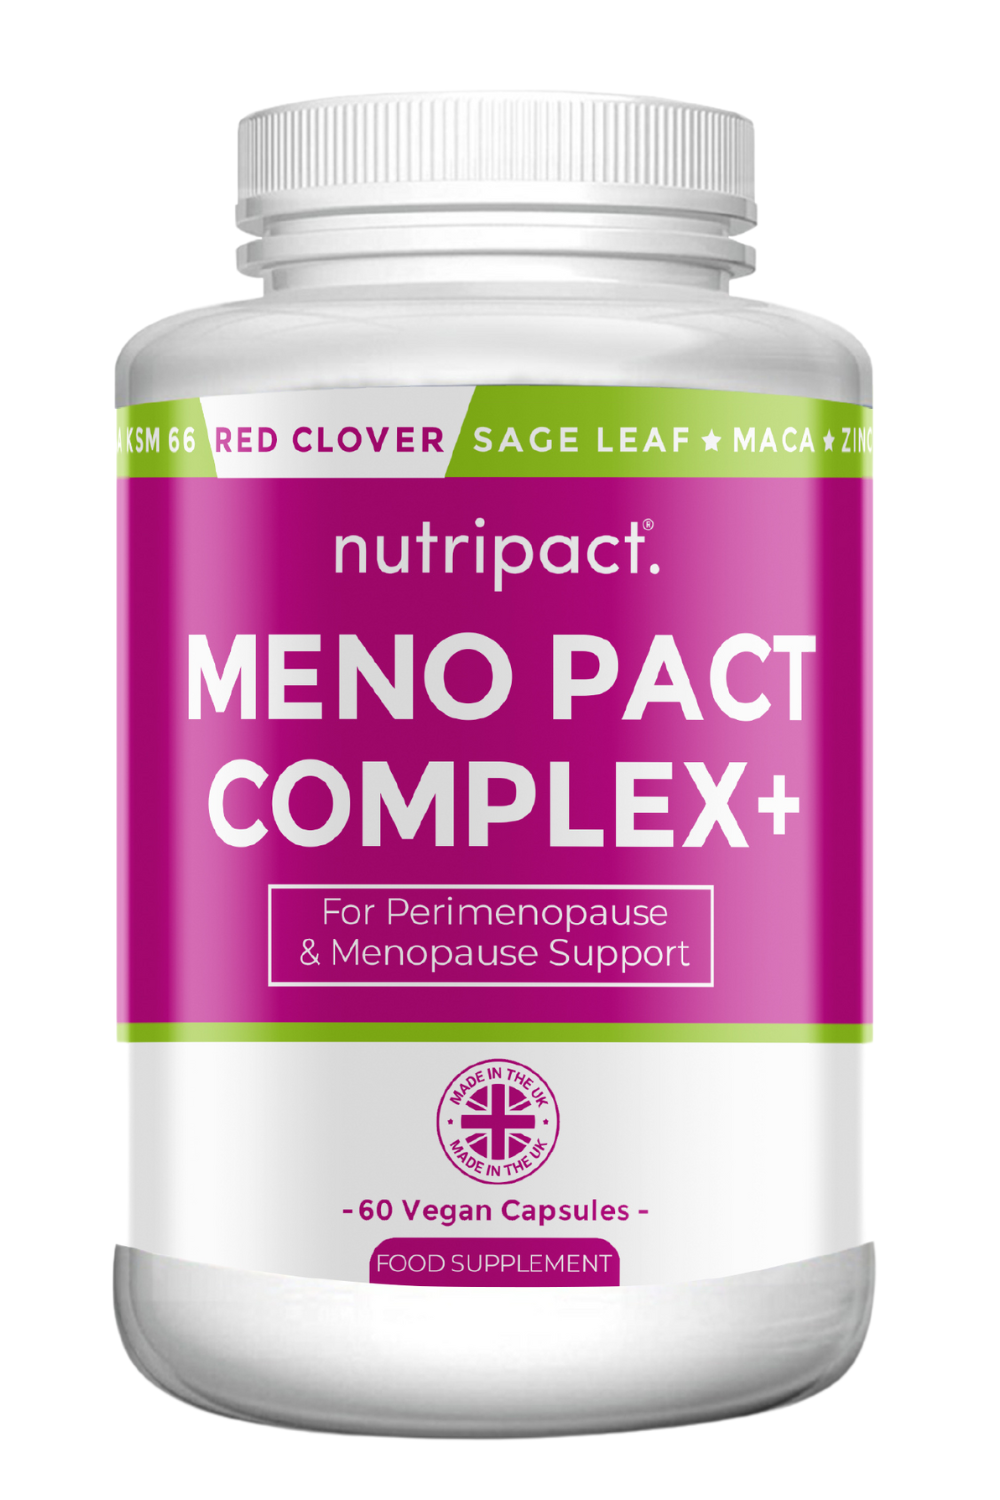 Our #1 Best Selling Menopause Supplement - Meno Support Complex